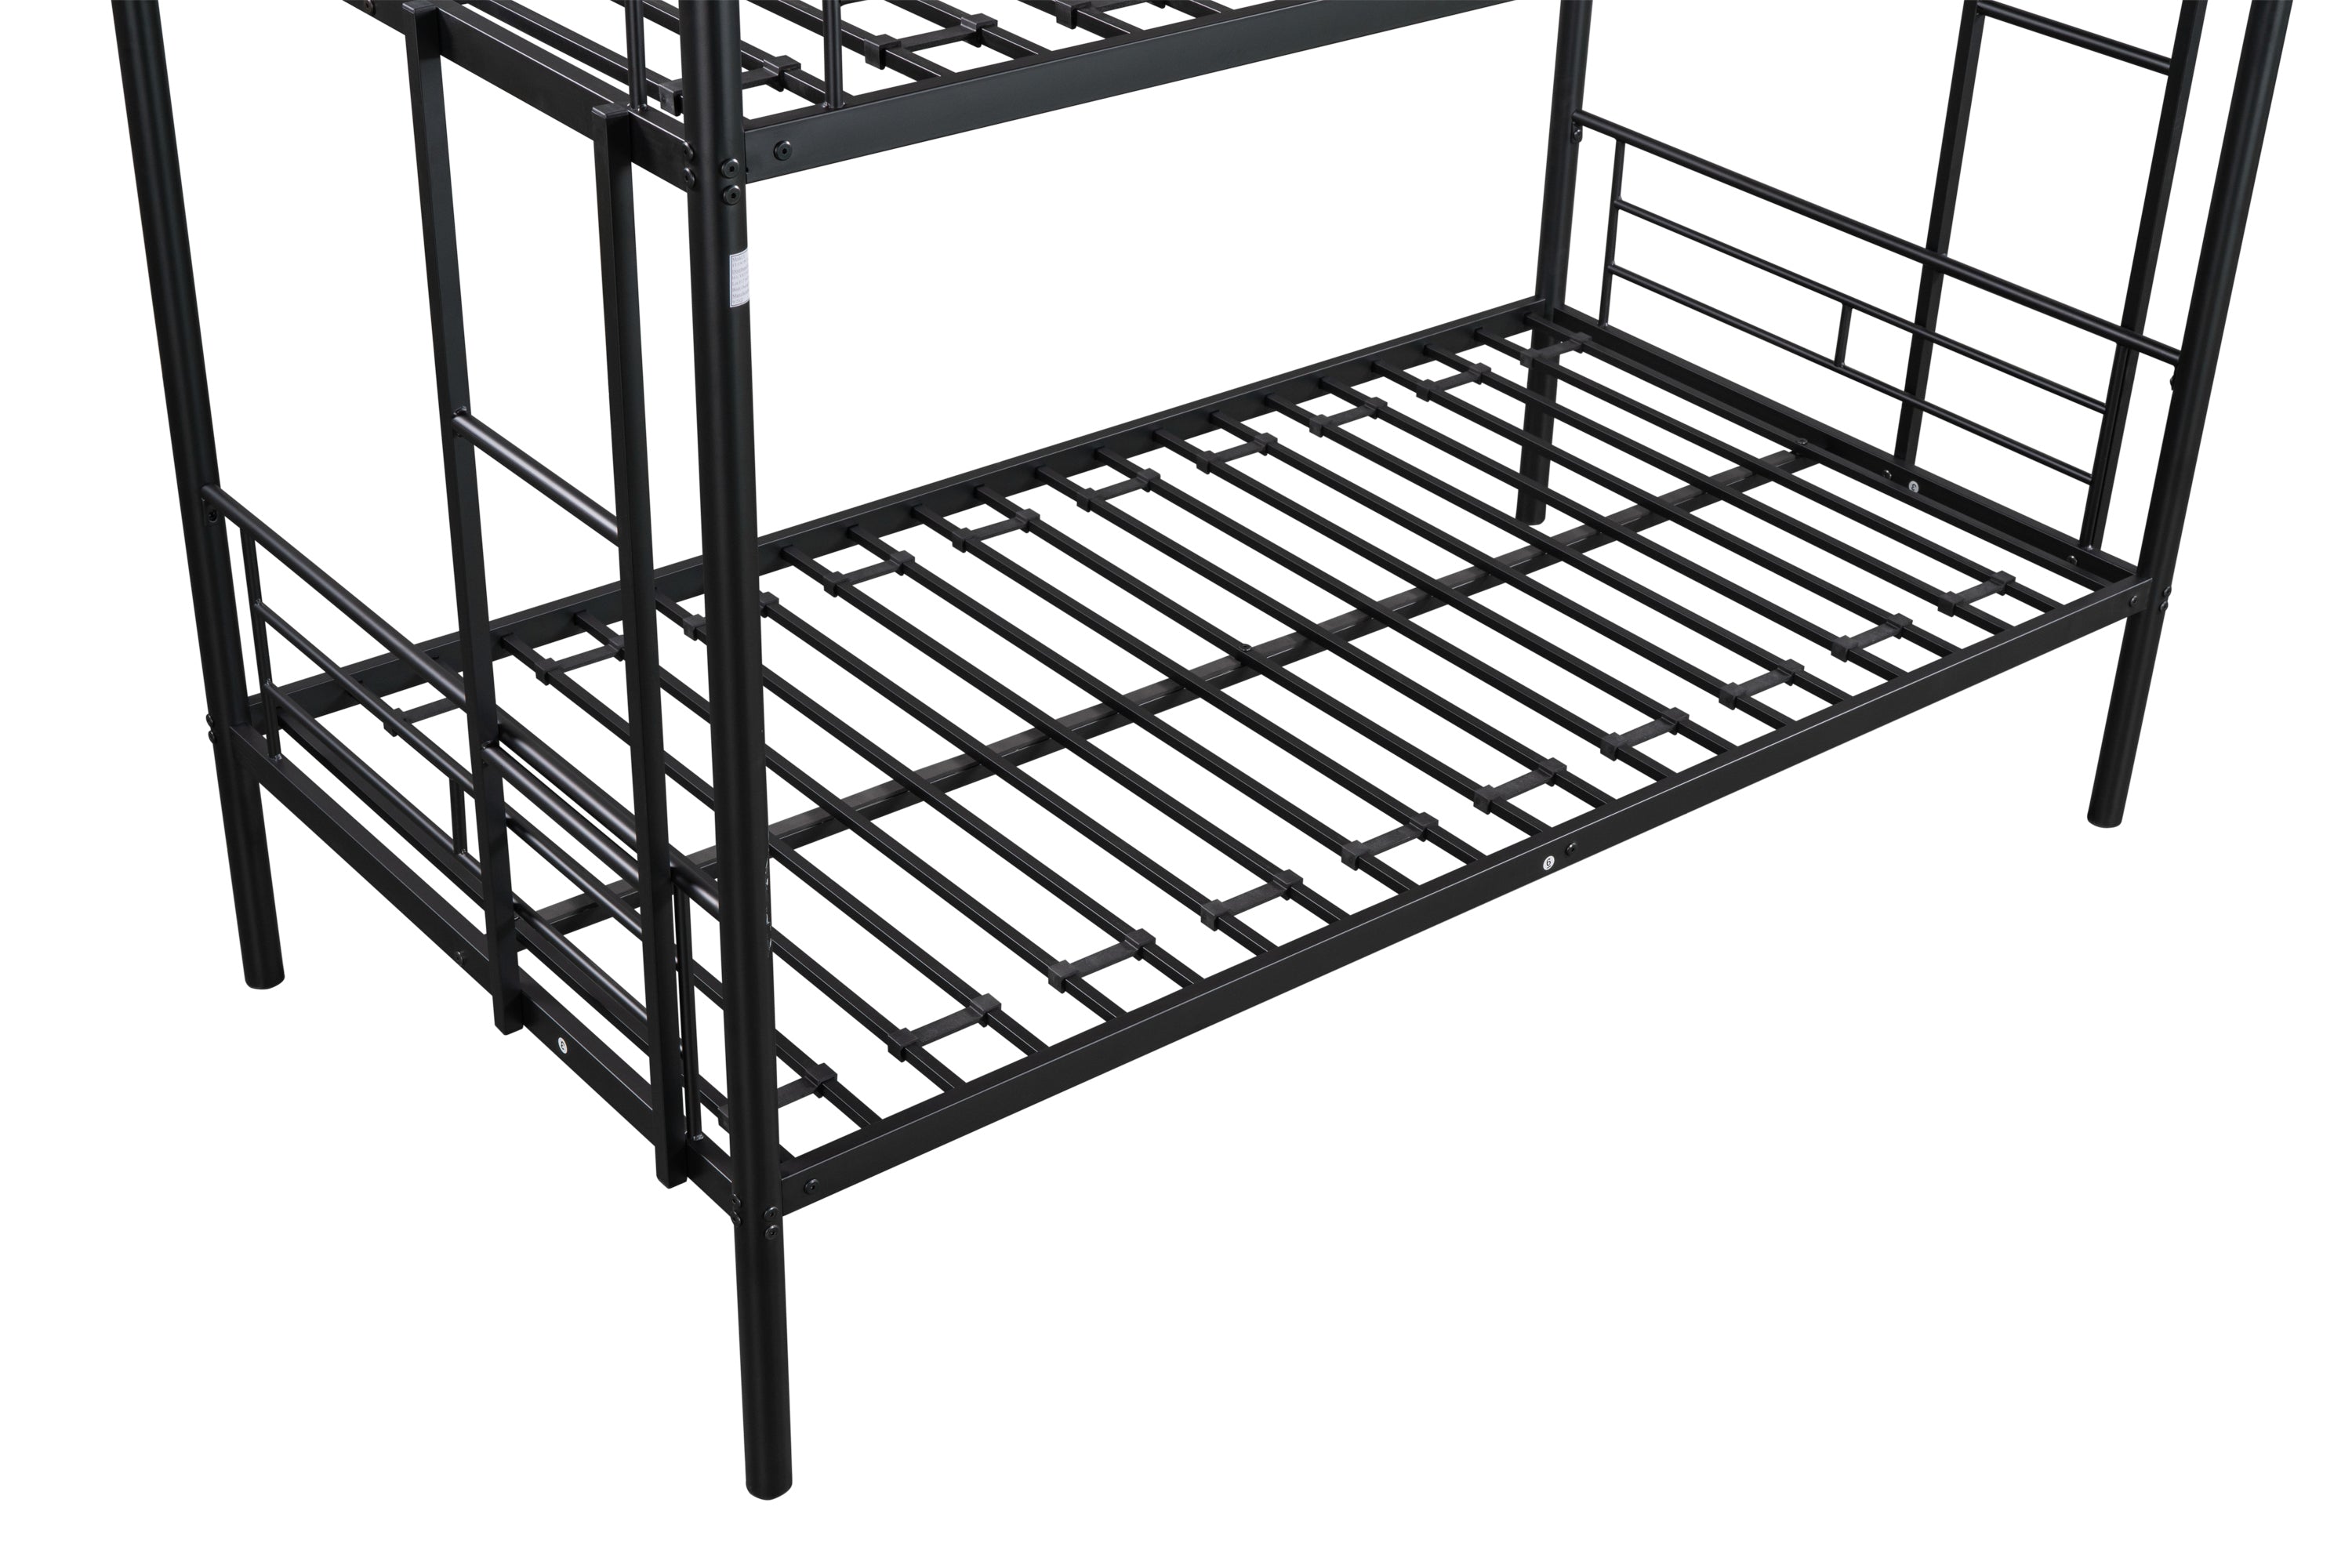 Metal Twin over Twin Bunk Bed - Heavy-duty Sturdy Metal - Noise Reduced Design - 2 Side Ladders - Safety Guardrail - CPC Certified - No Box Spring Needed